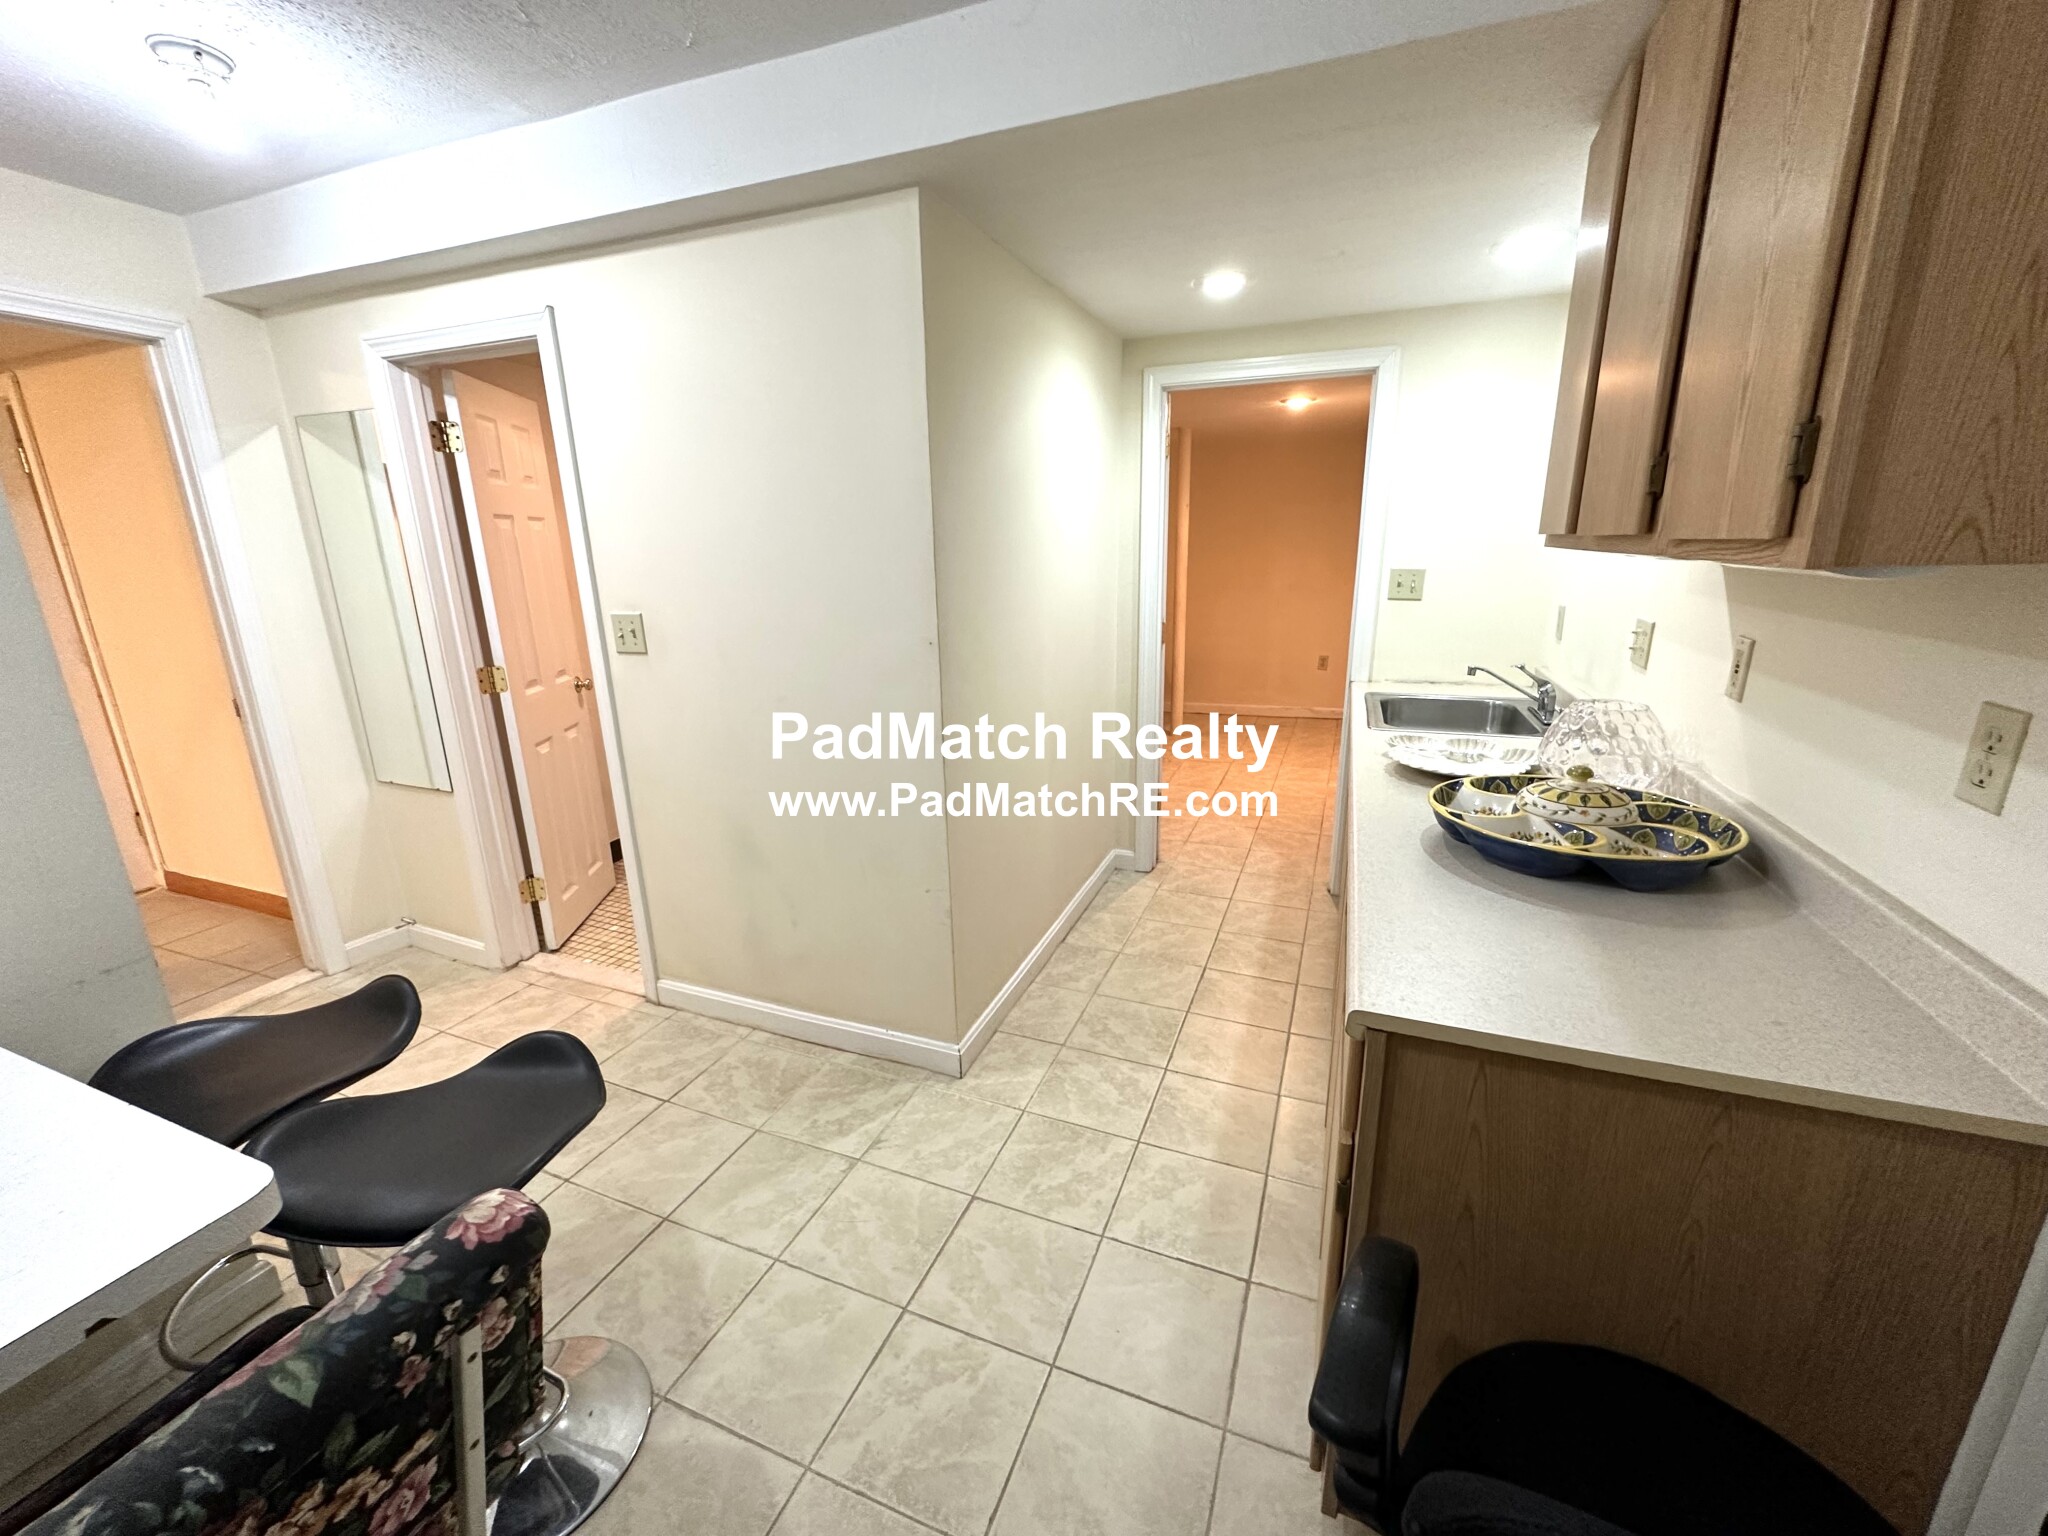 4 Beds, 3.5 Baths apartment in Brookline, Chestnut Hill for $7,500